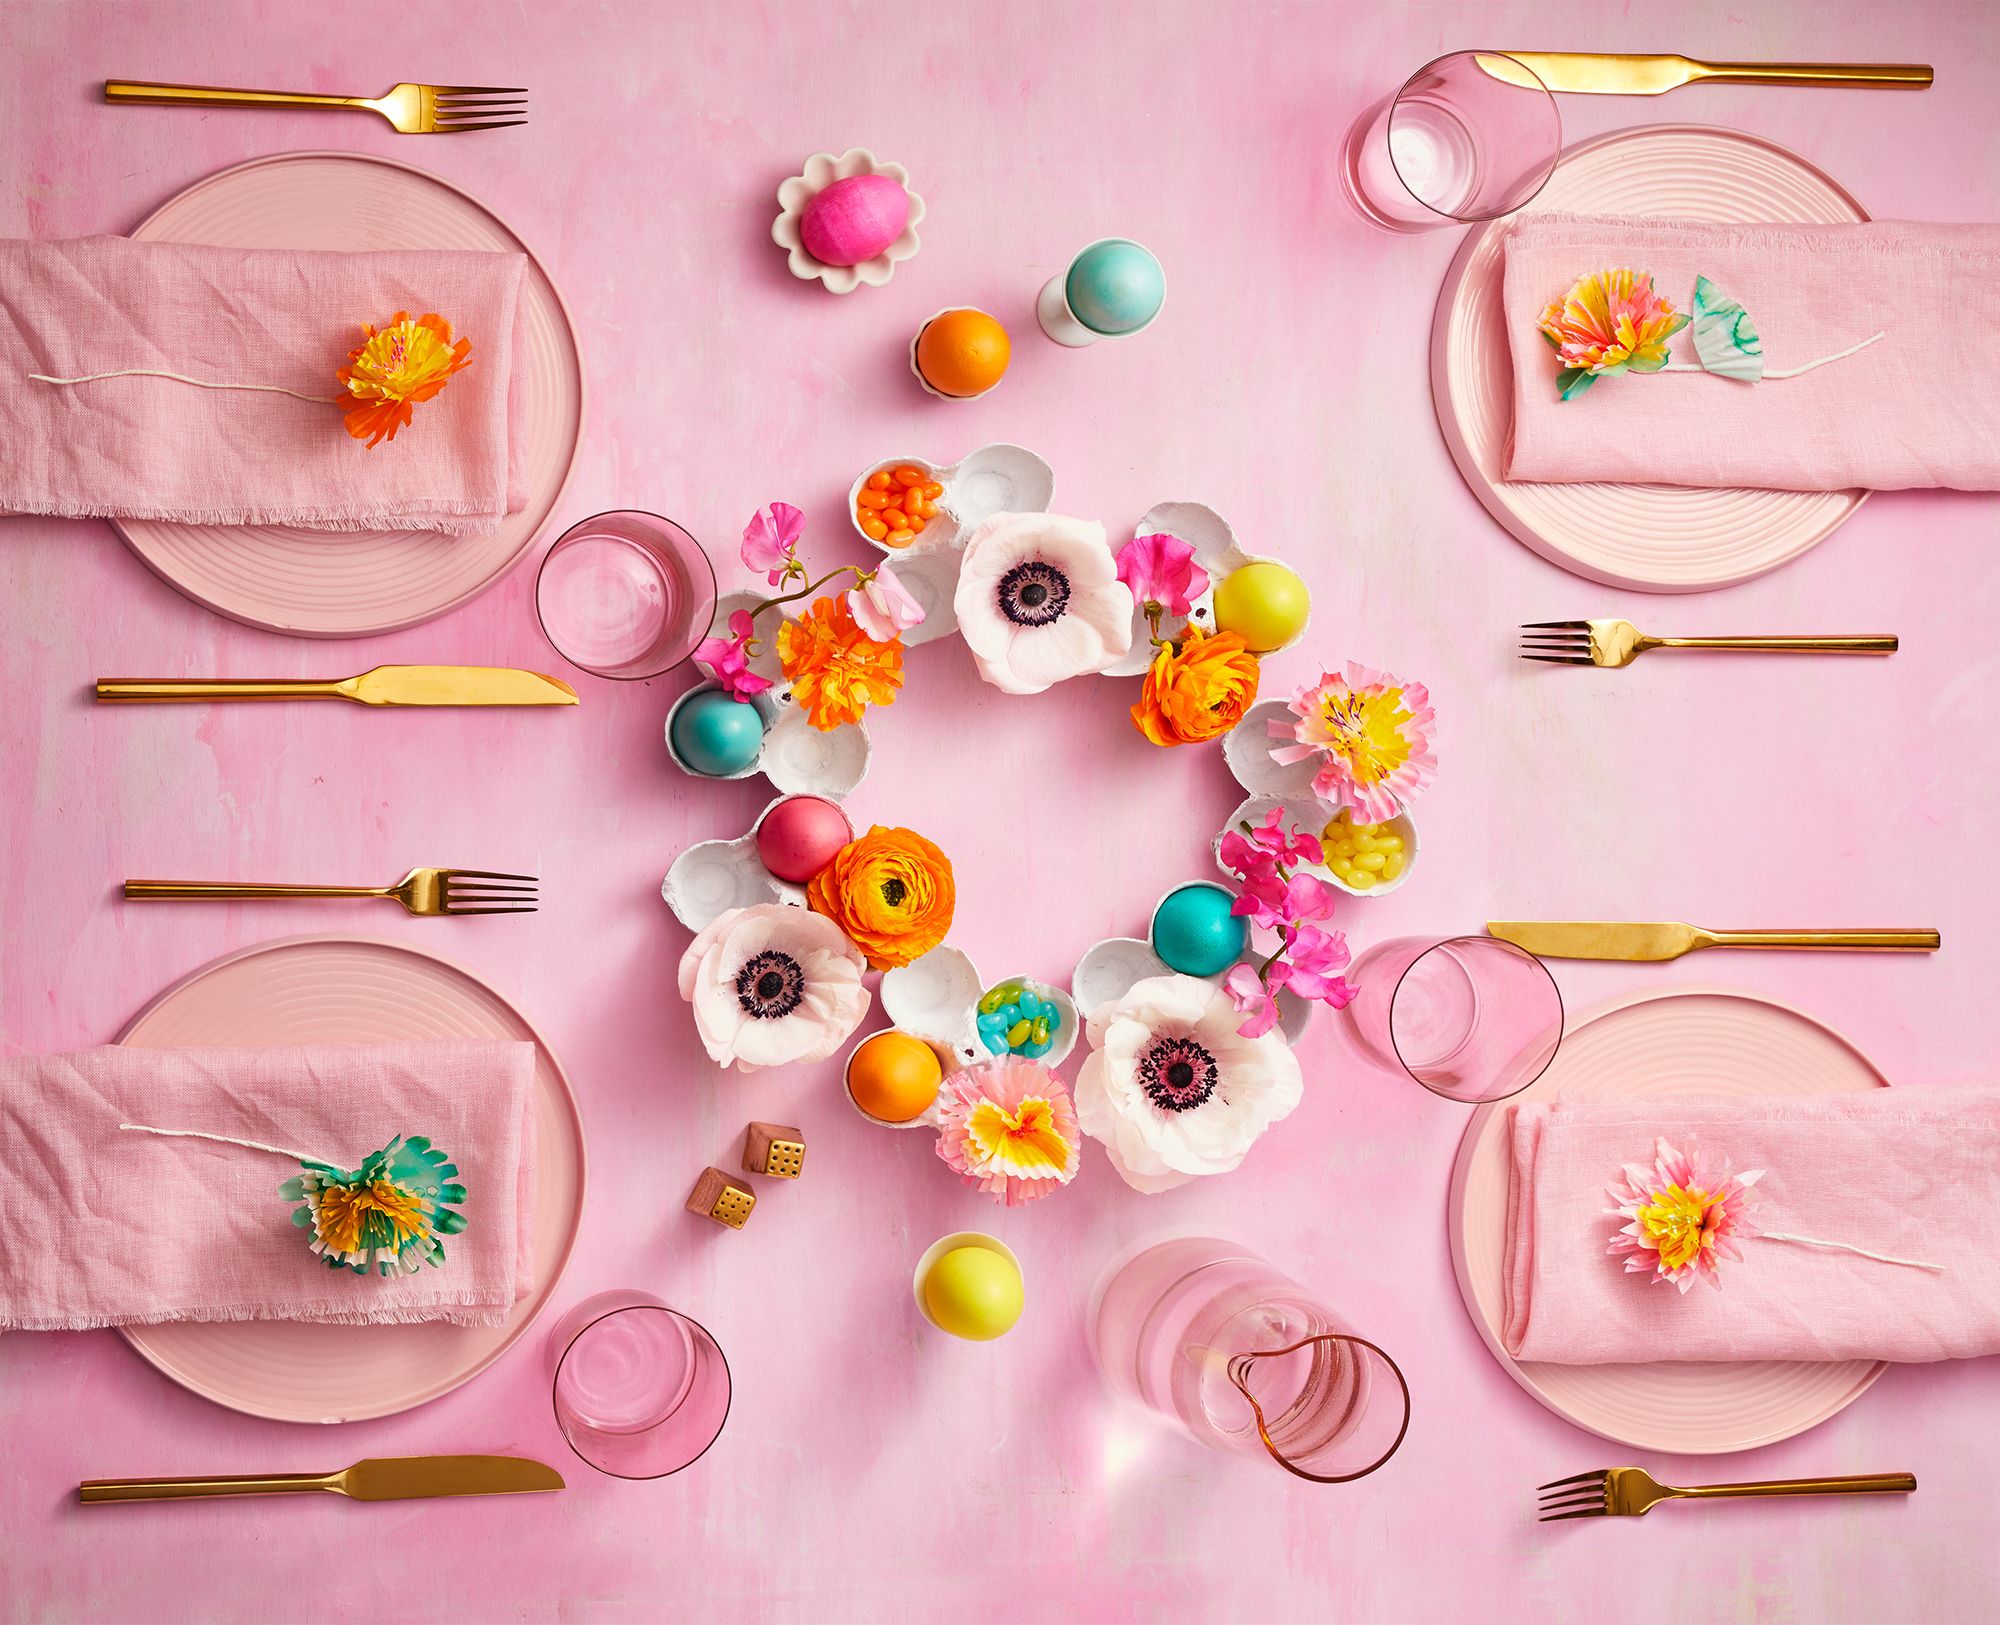 60 Best Easter Decoration Ideas 2021 - DIY Table & Home Decor for Easter  Sunday